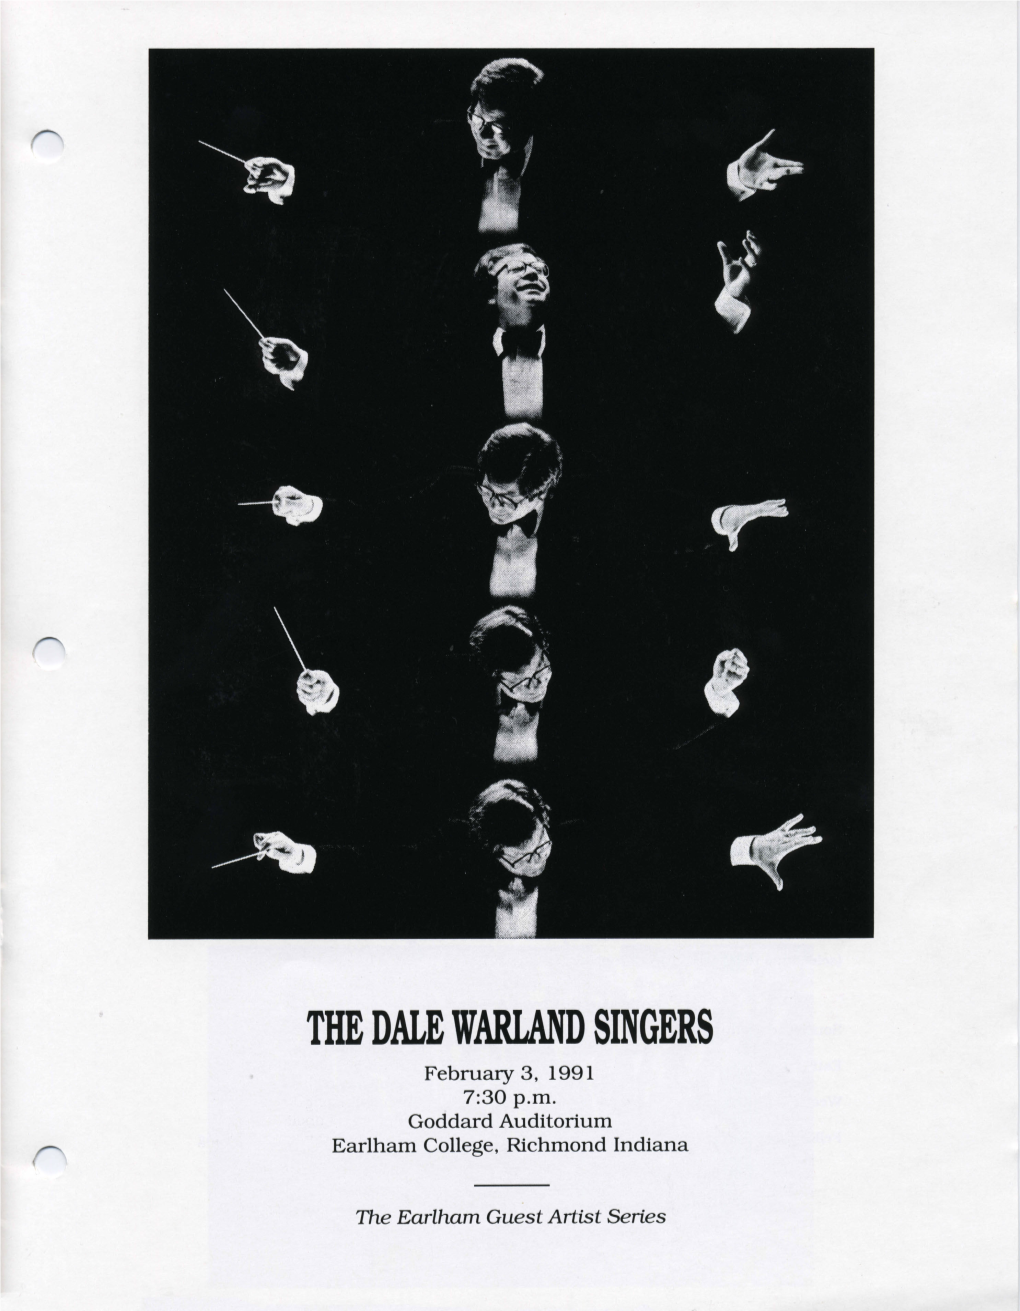 The Dale Warland Singers, February 3, 1991